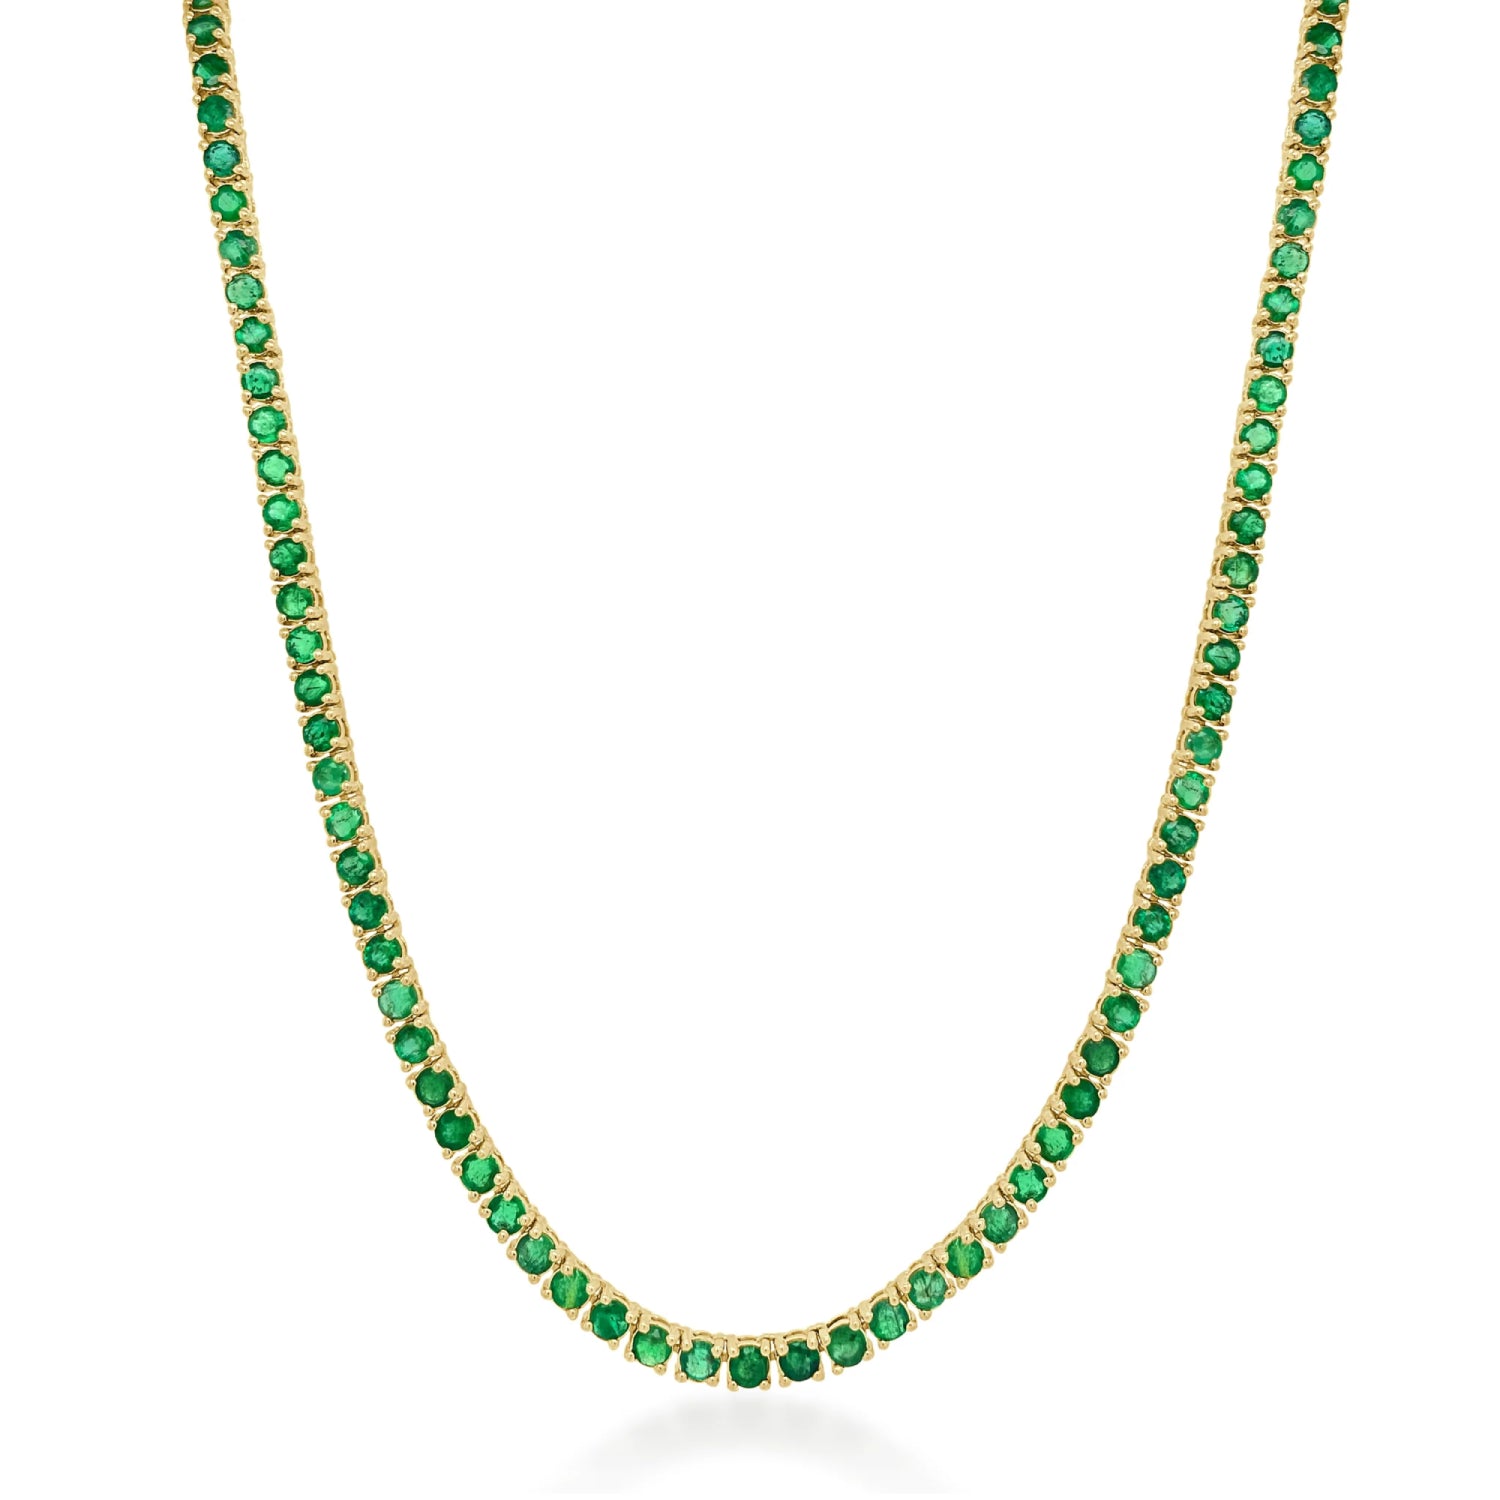 Round Cut Emerald Tennis Necklace in Yellow Gold